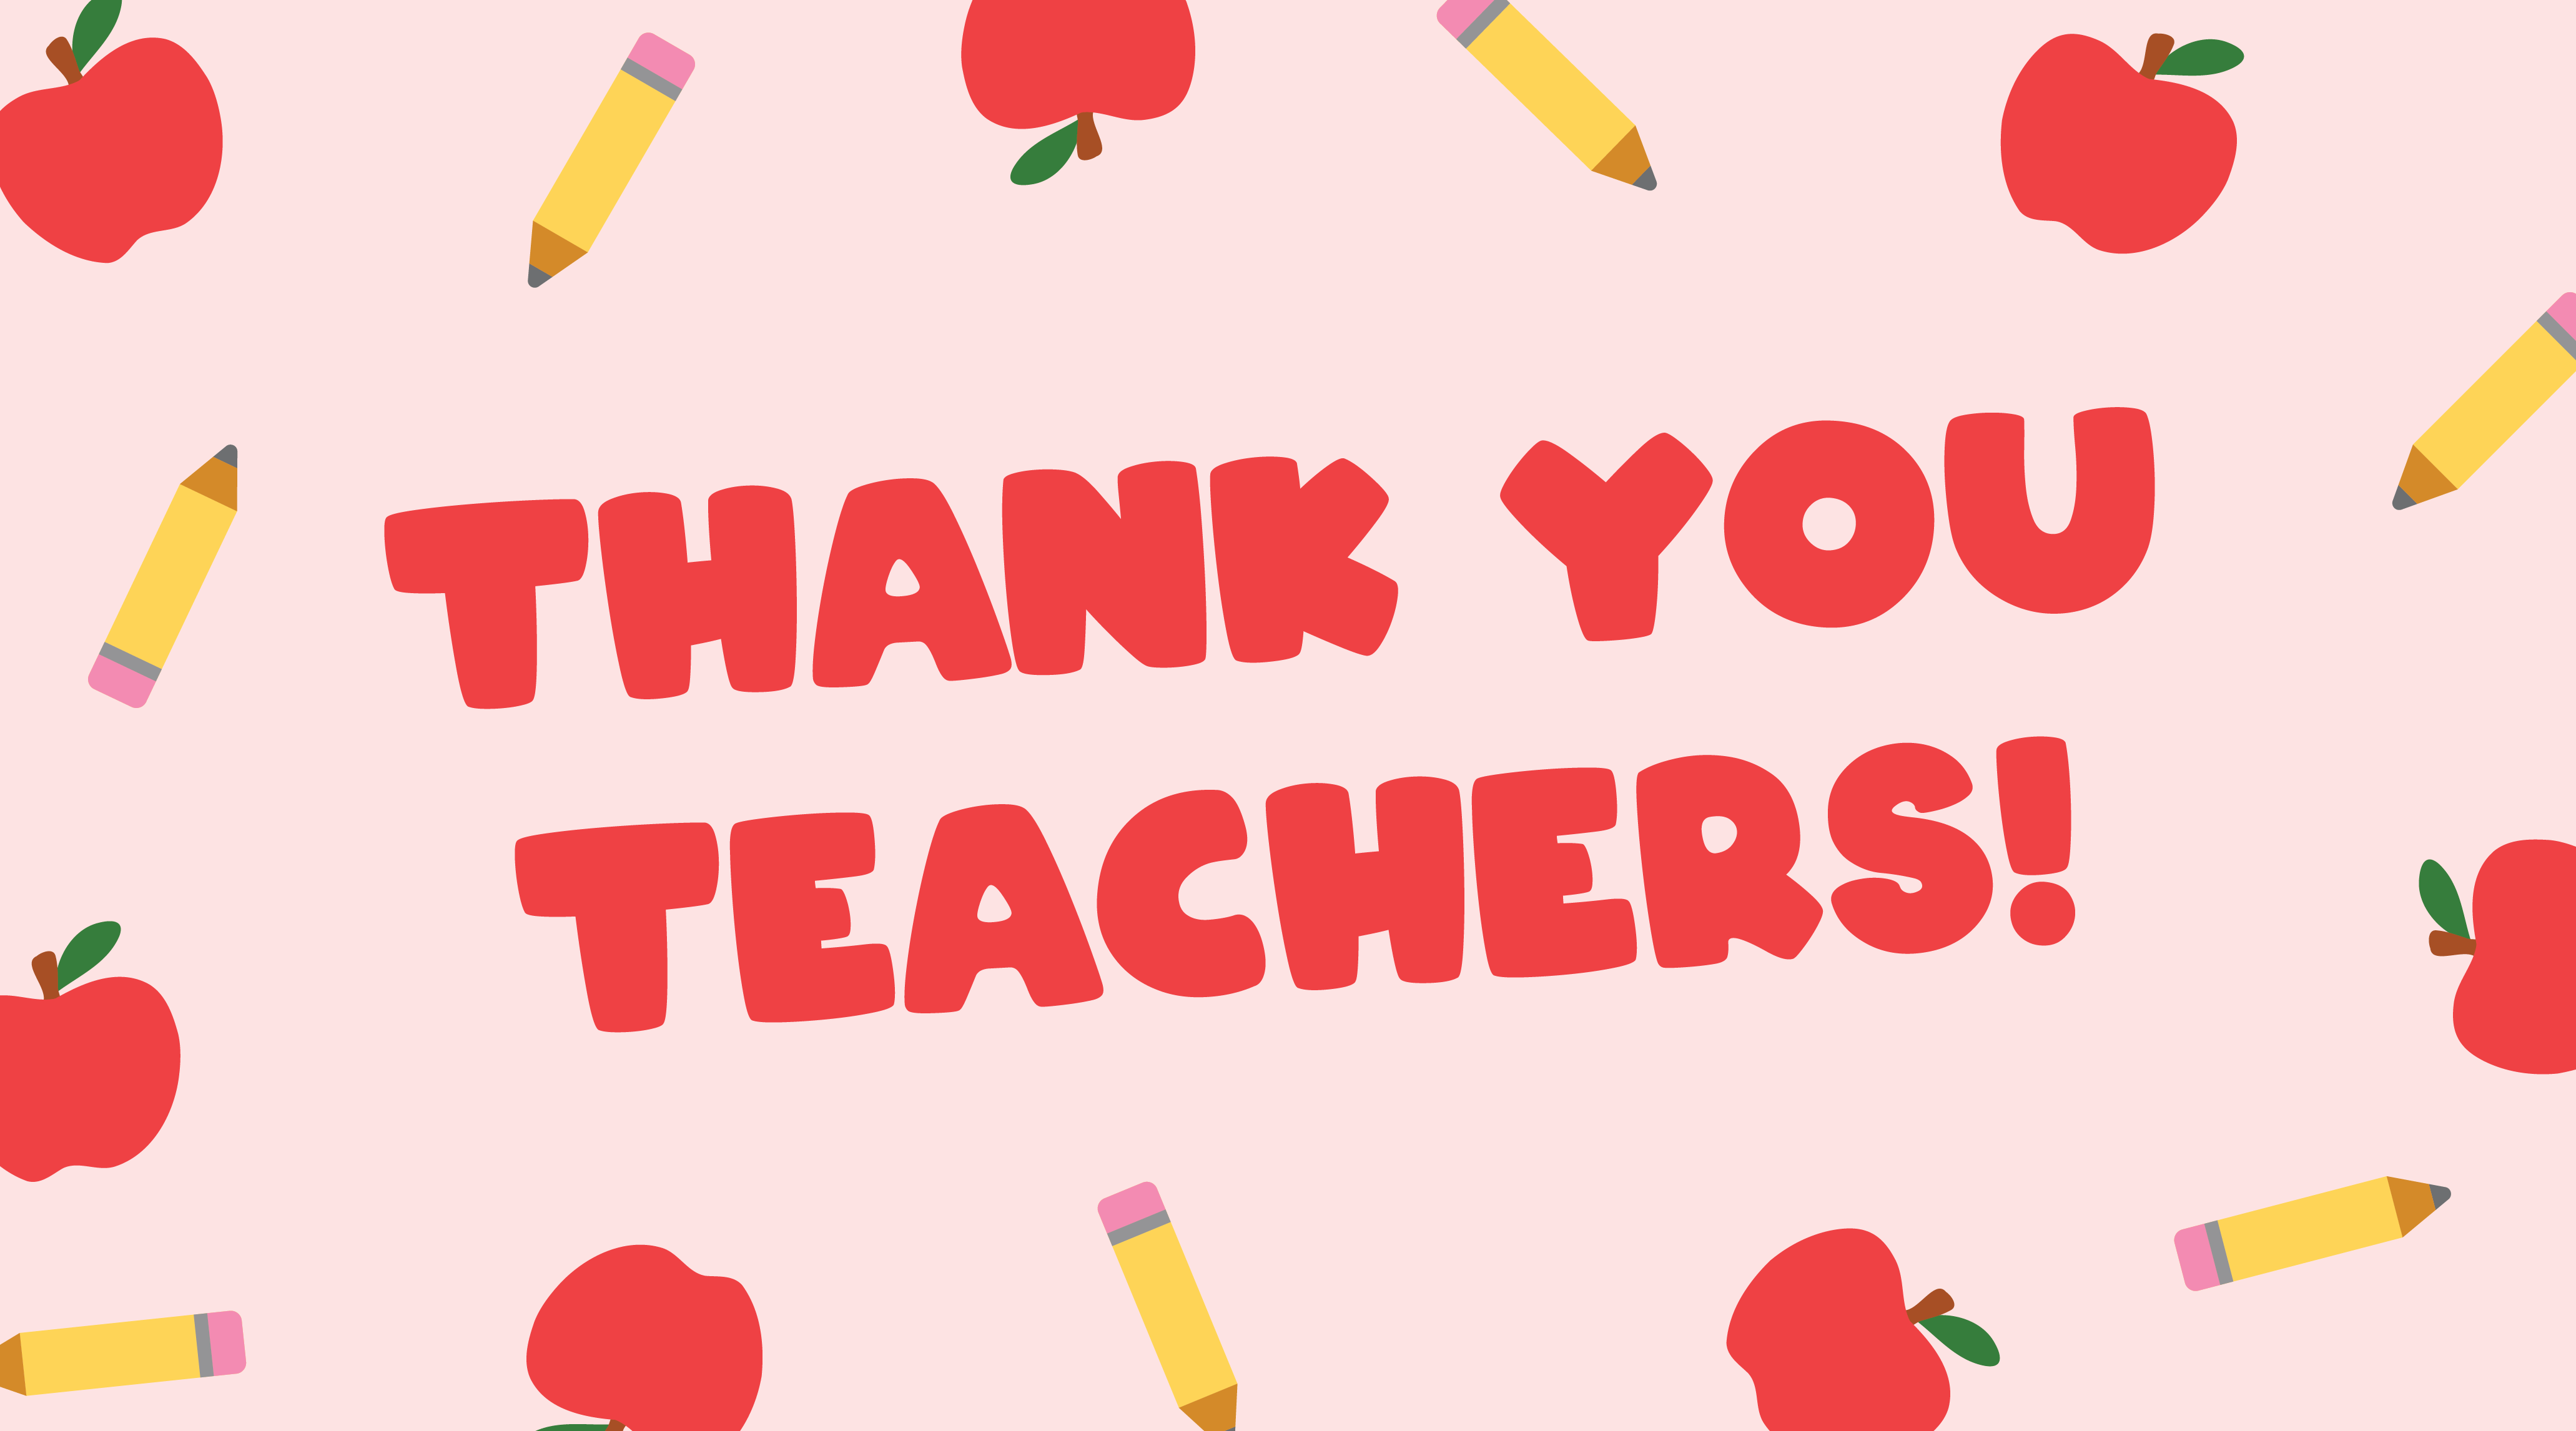 Happy Teacher Appreciation Week with Red Apples an Pencils 